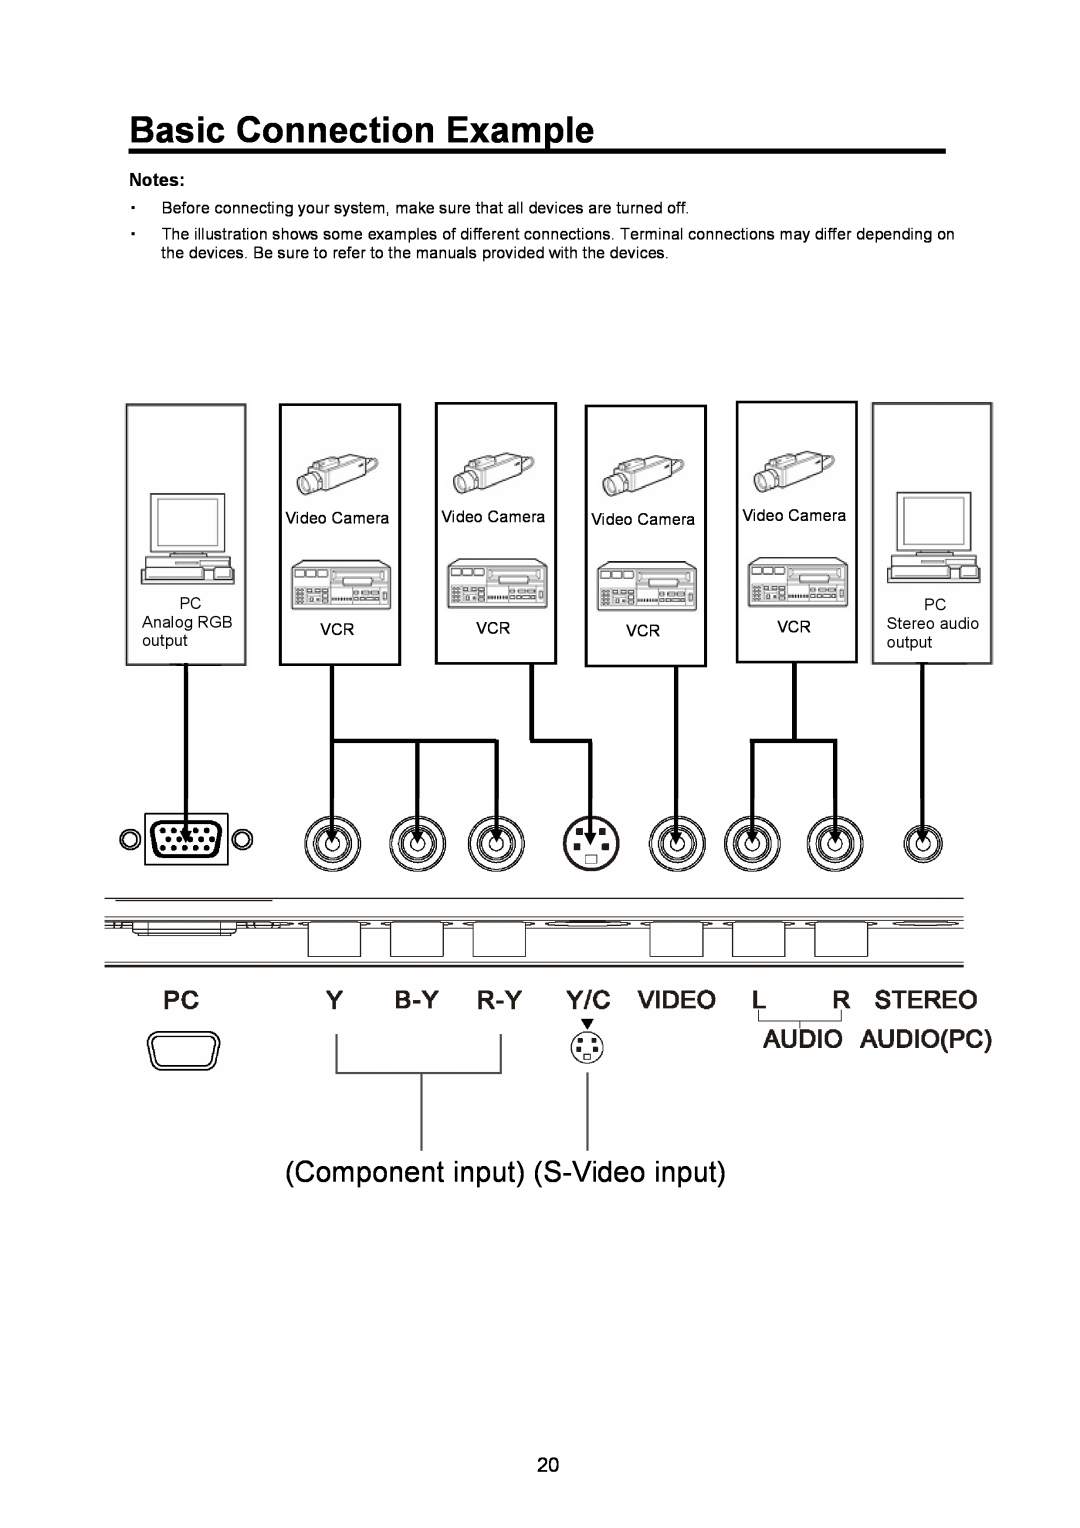 JVC GD-17L1G, GD-19L1G manual Basic Connection Example, Component input S-Video input 